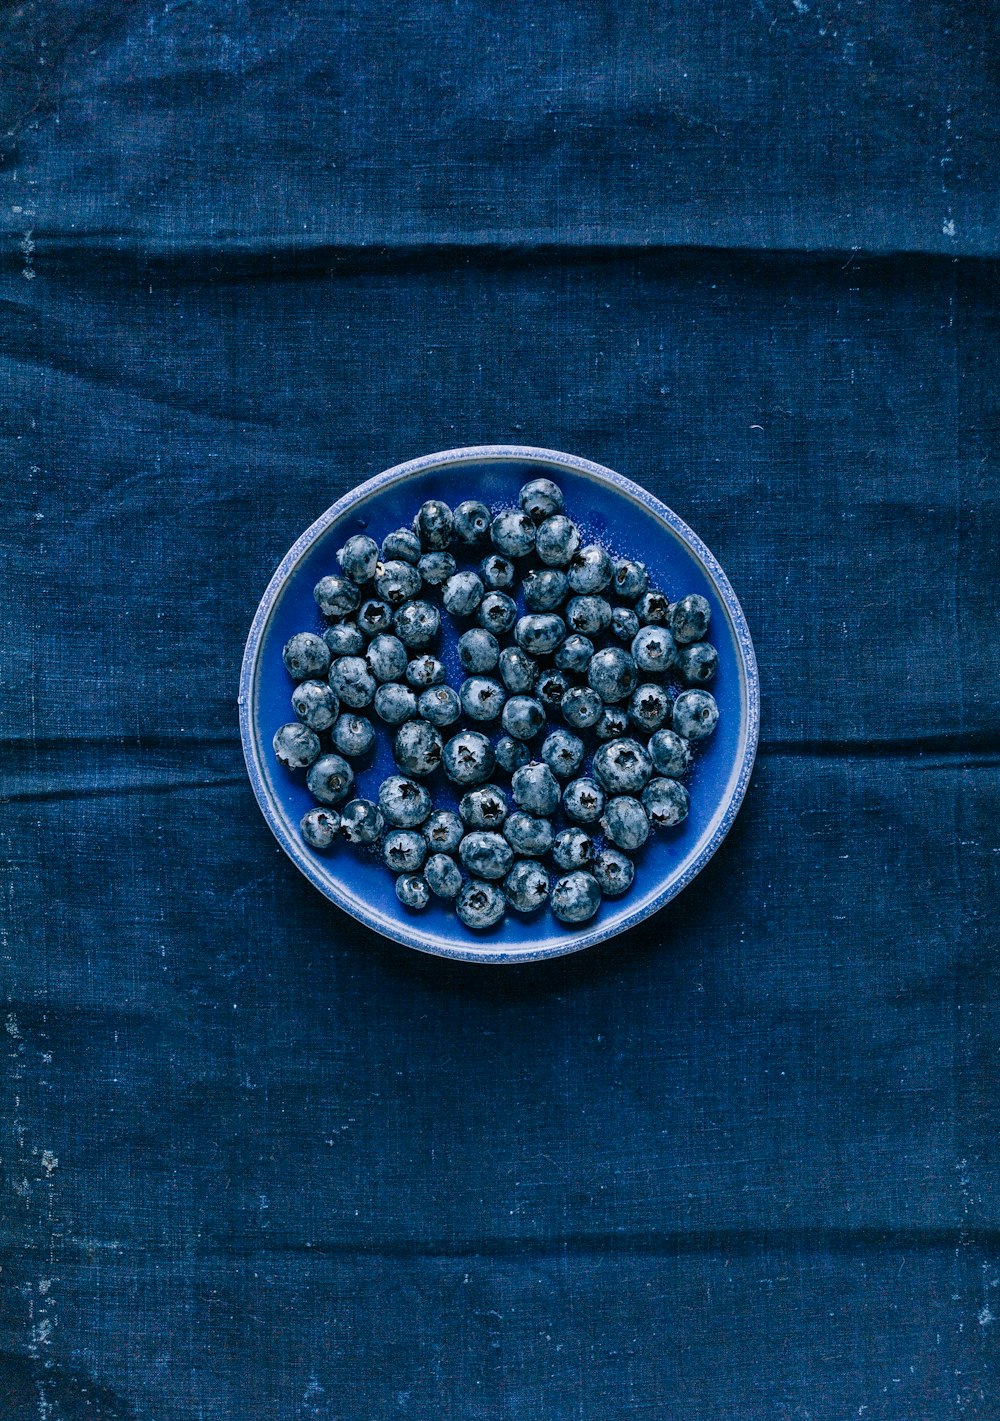 blue berries on blue round plate